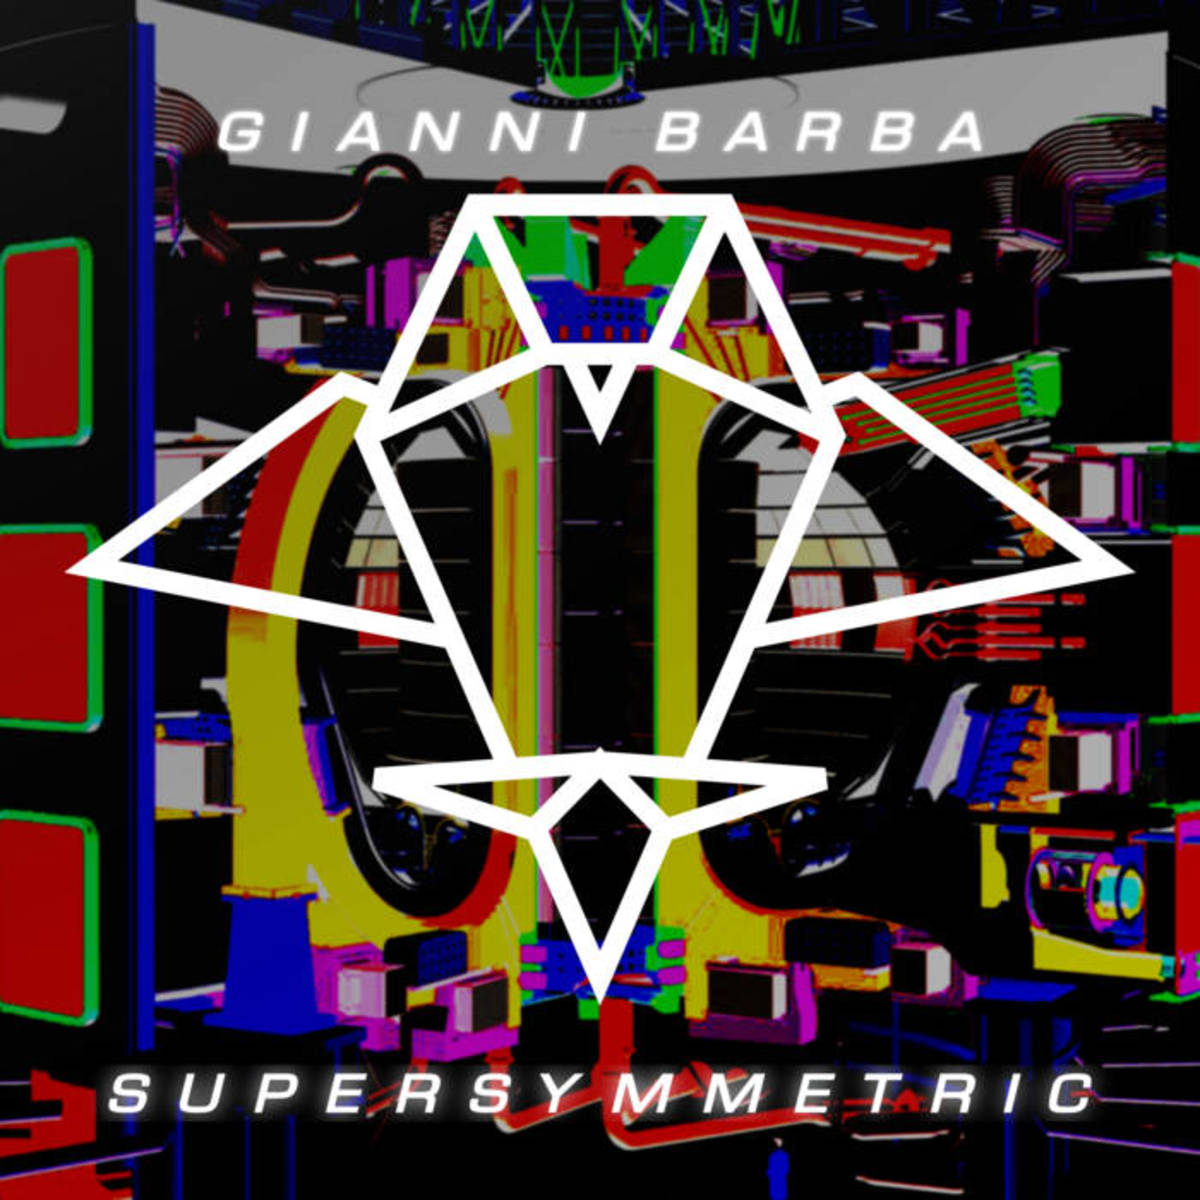 synth-single-review-supersymmetric-by-gianni-barba